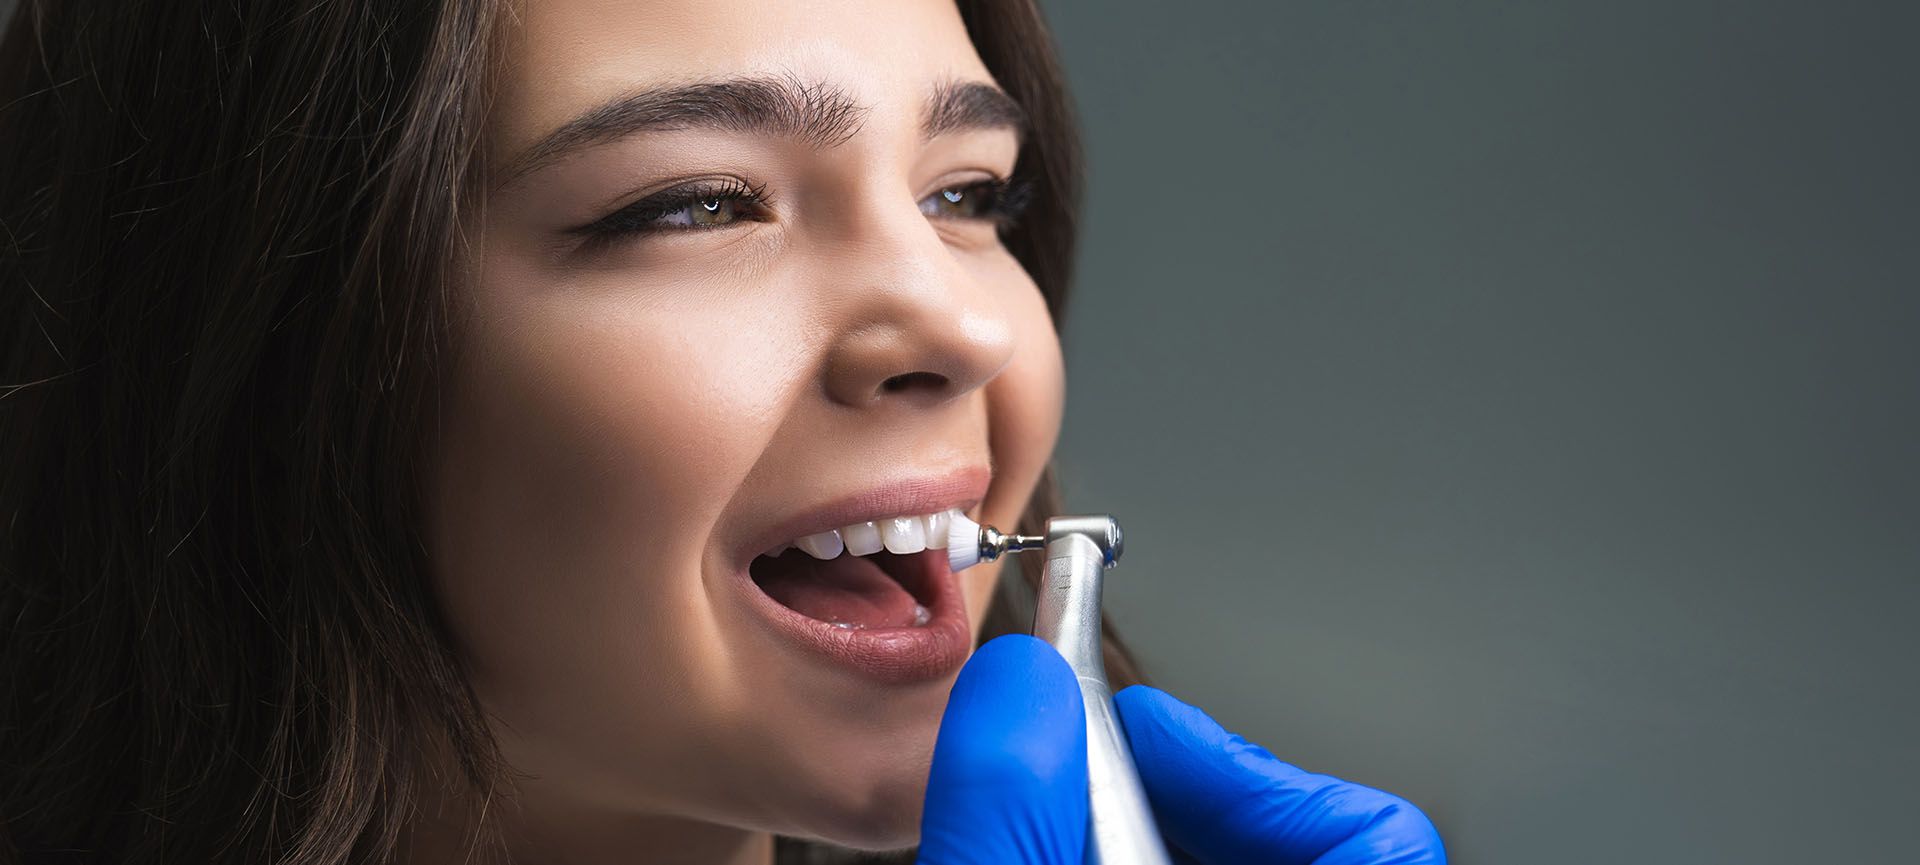 How Much Are Dental Cleanings Without Insurance?